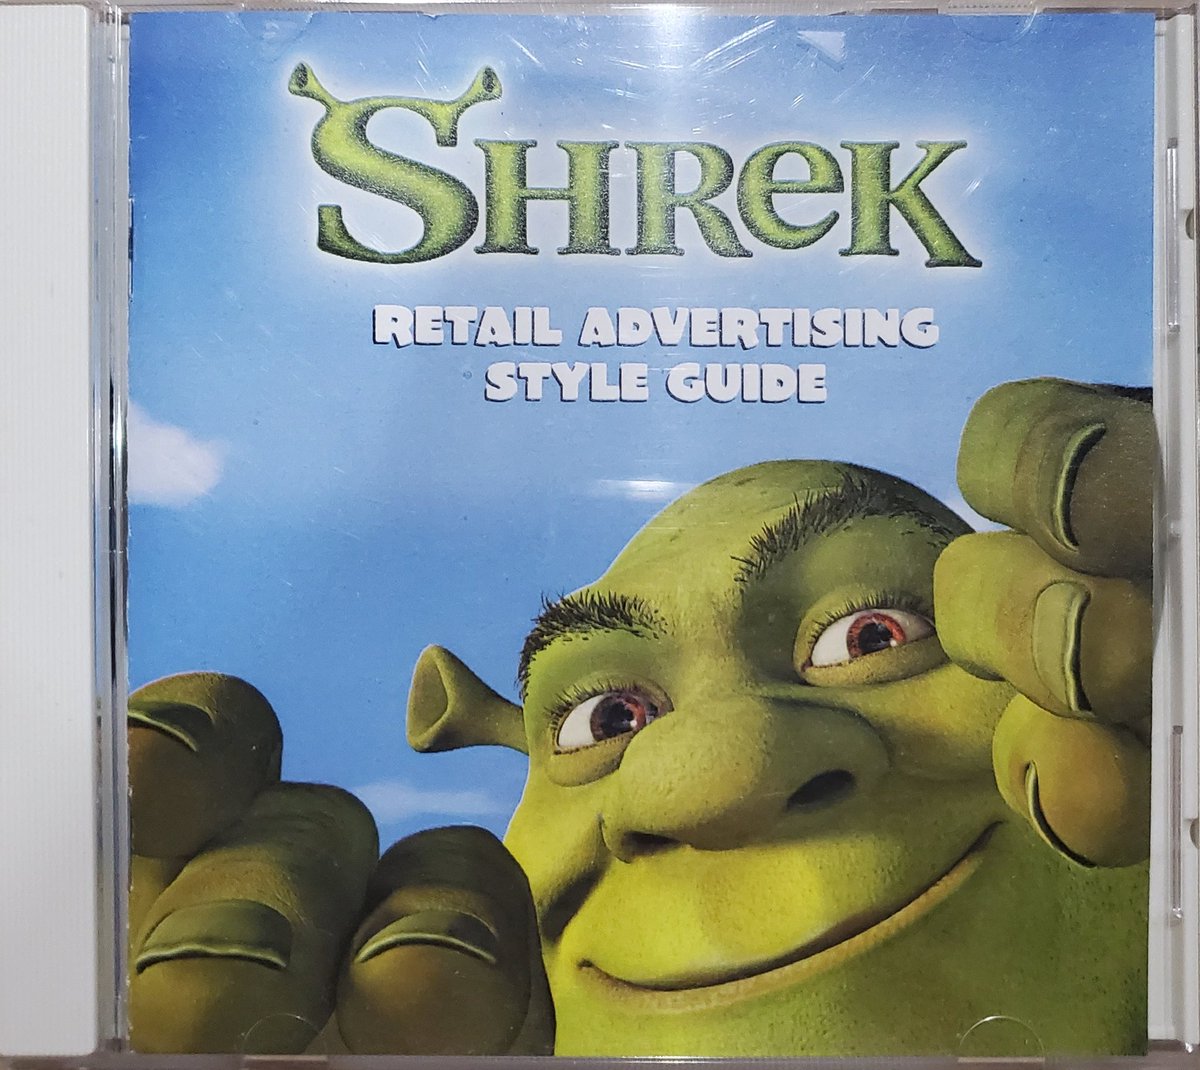 Thread: Diving through the Shrek Retail Advertising Style Guide and sharing all the interesting things I find on it